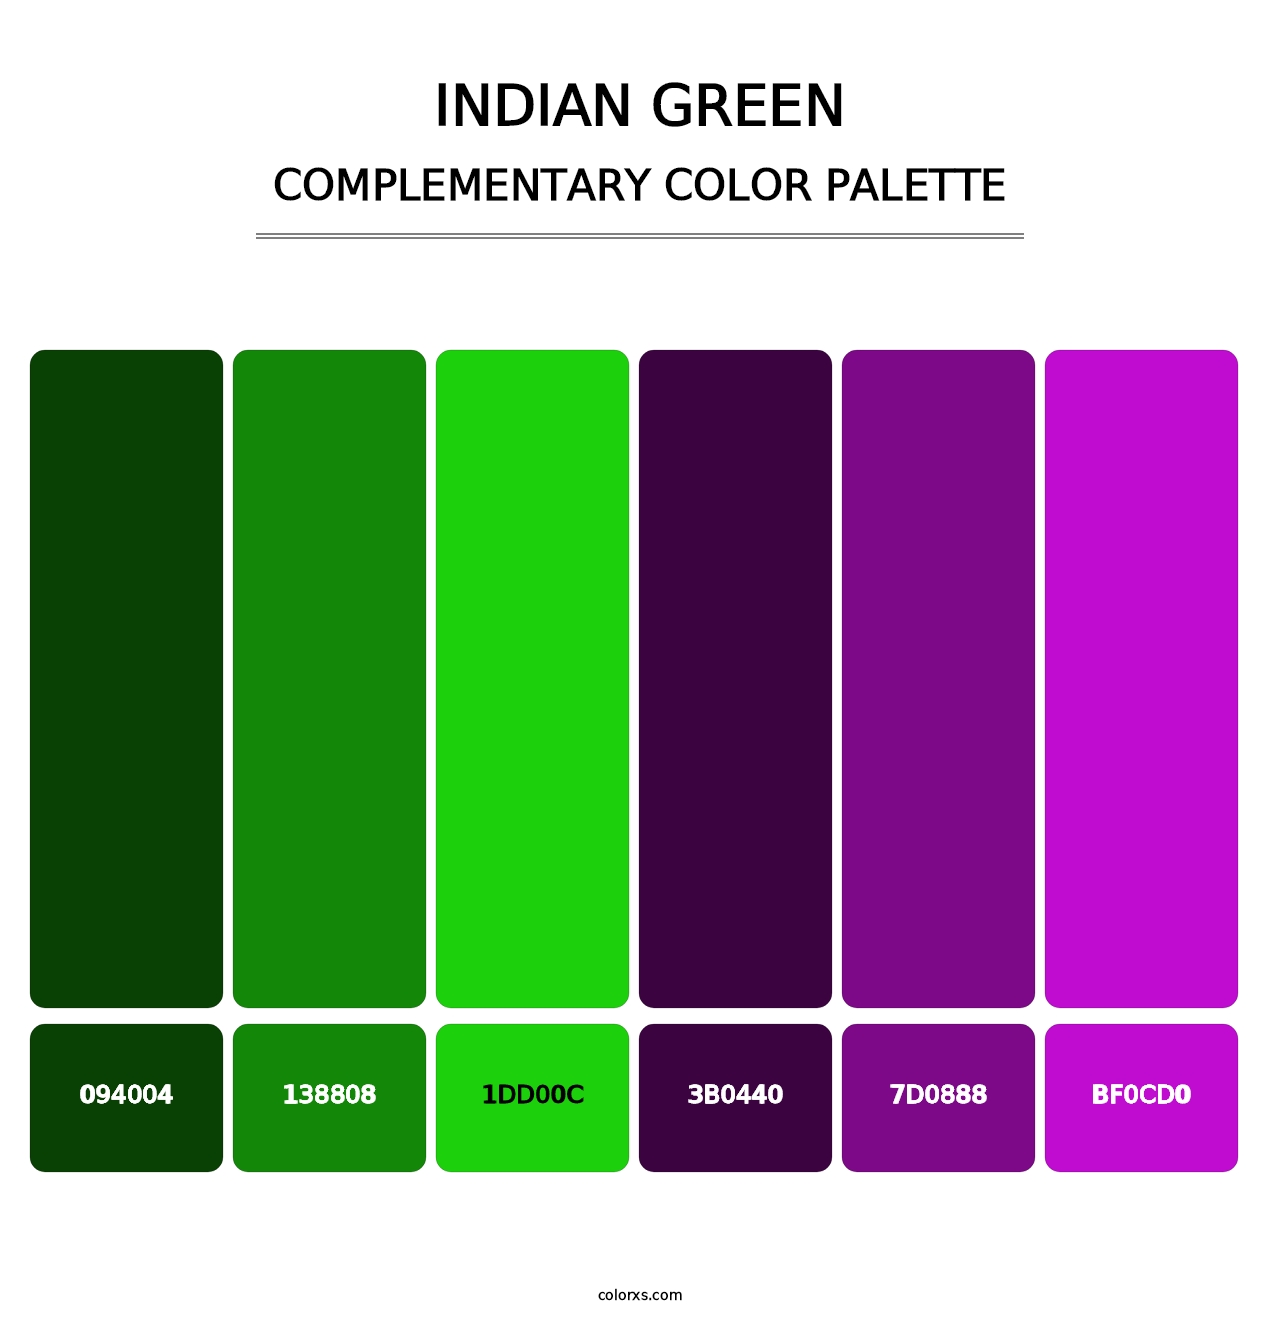 Indian Green - Complementary Color Palette